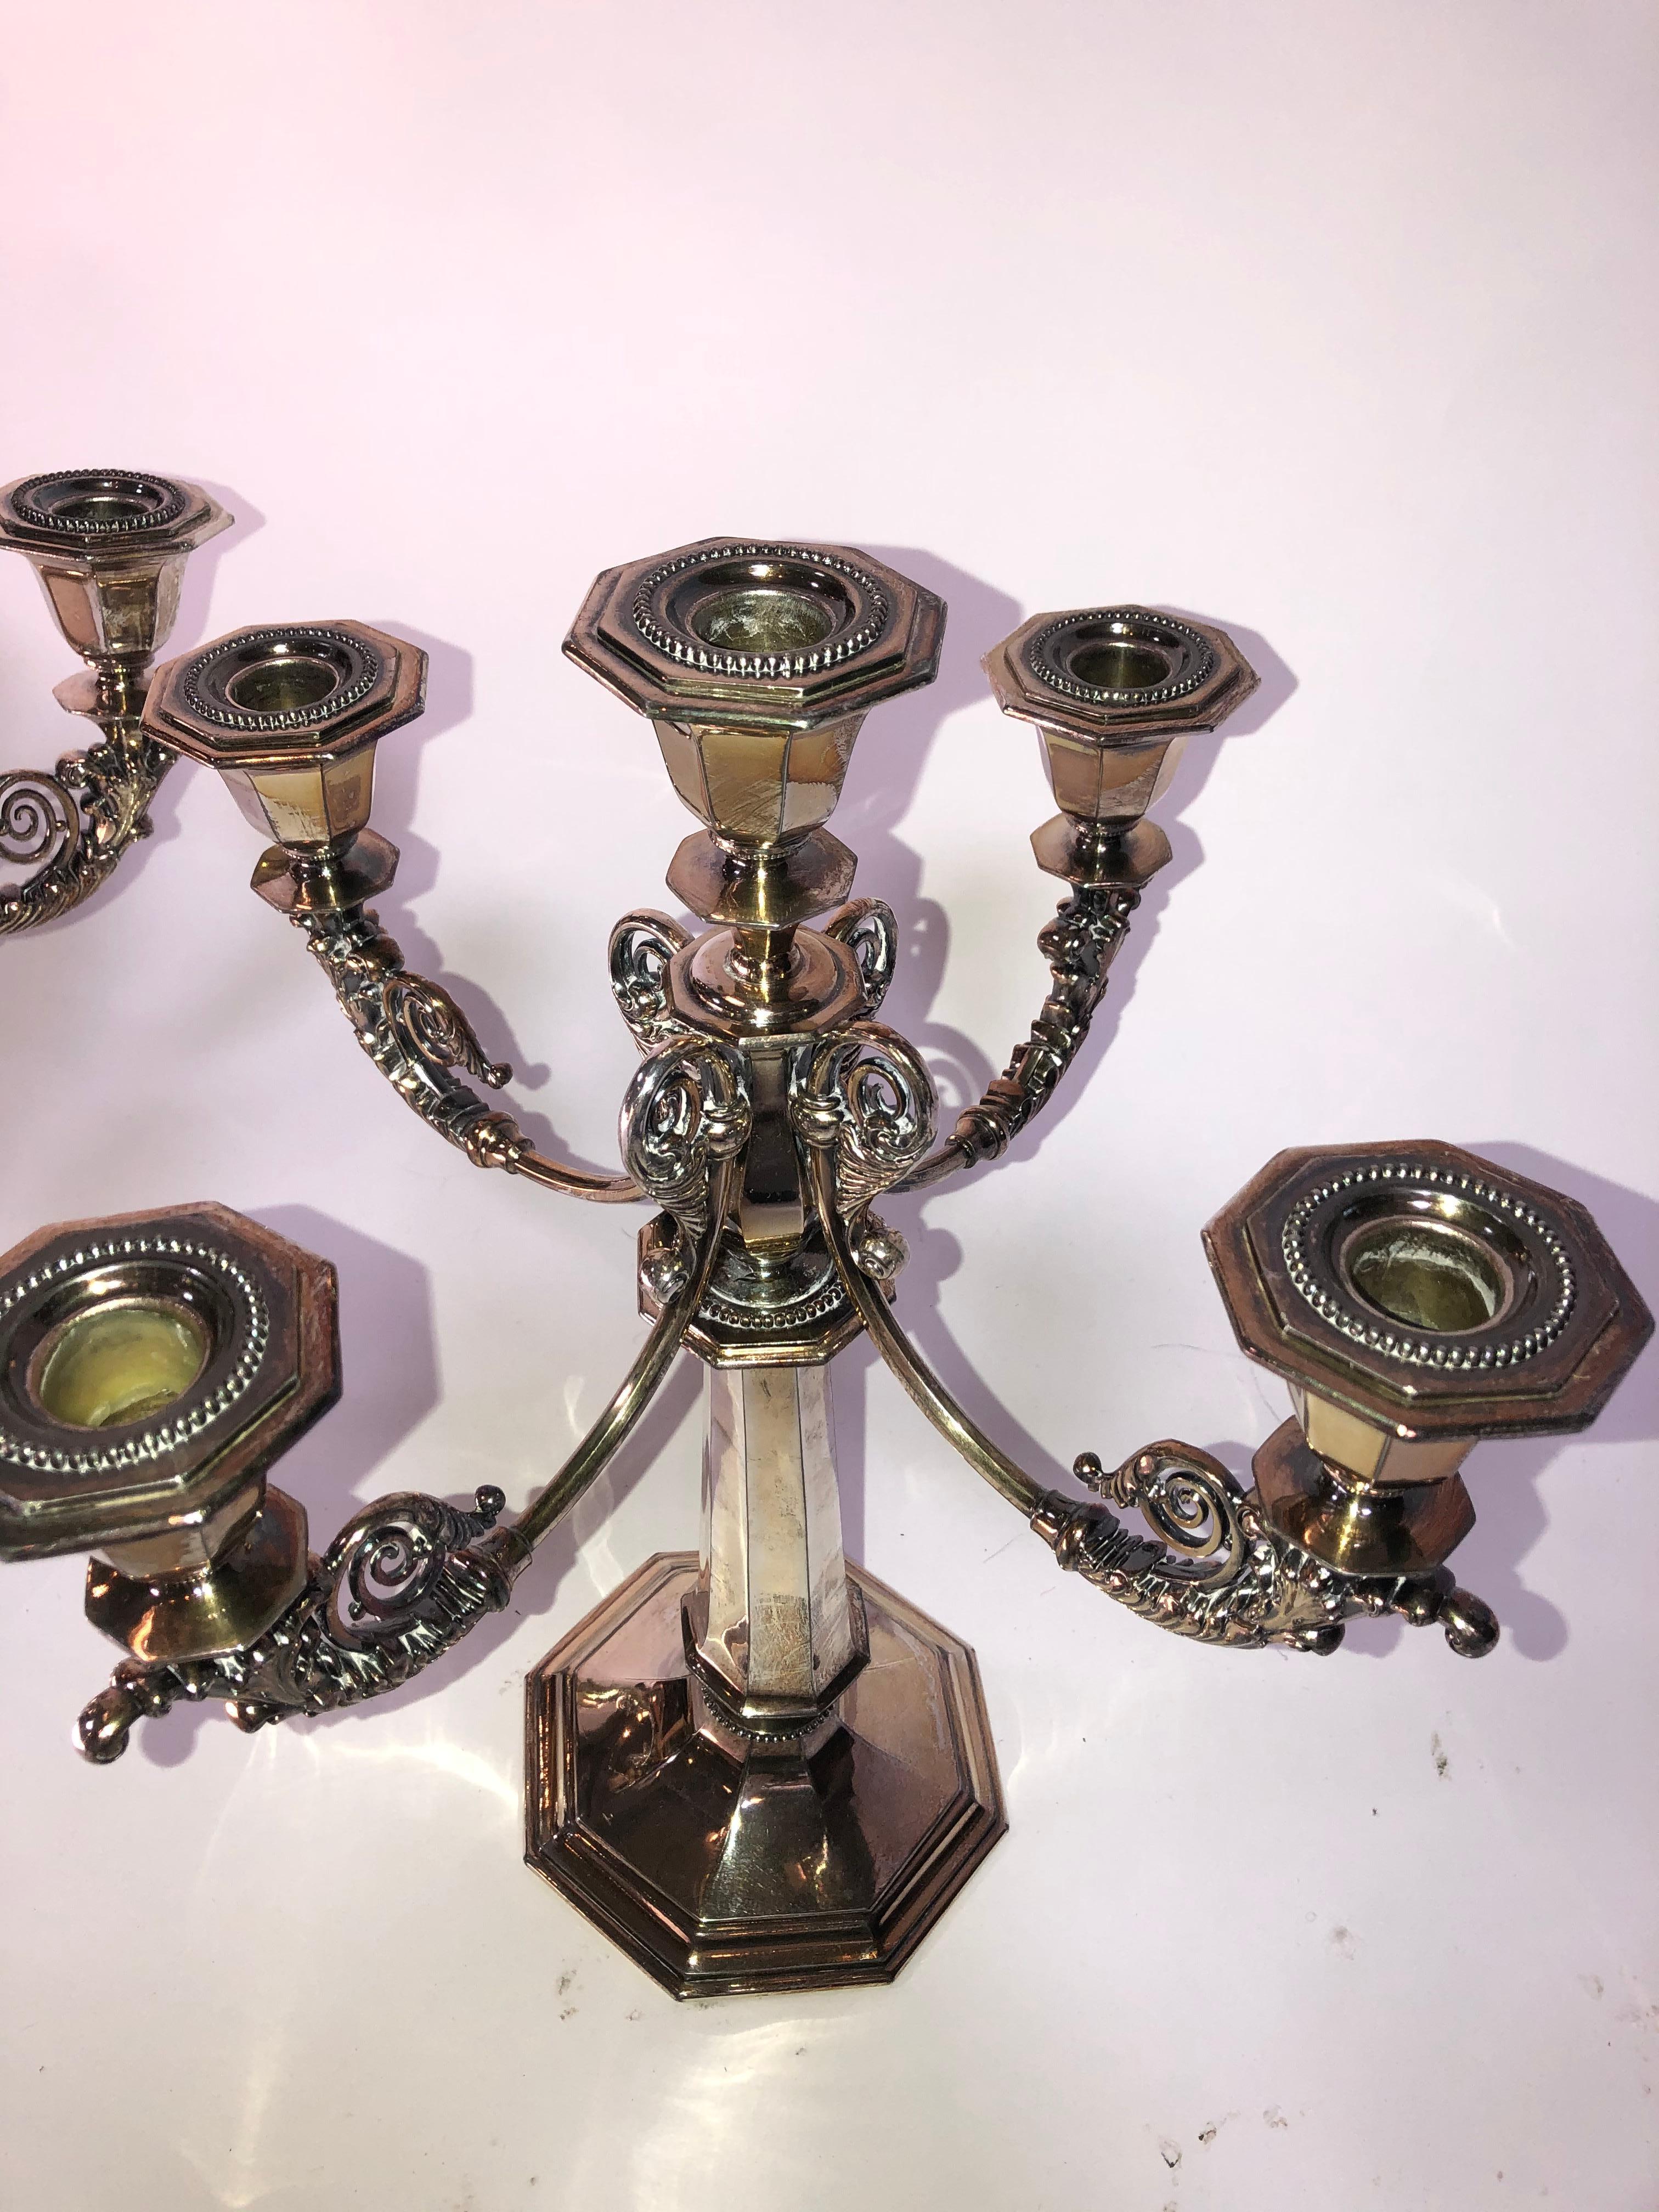 Beautiful silver plate candelabras from the early 20th century.